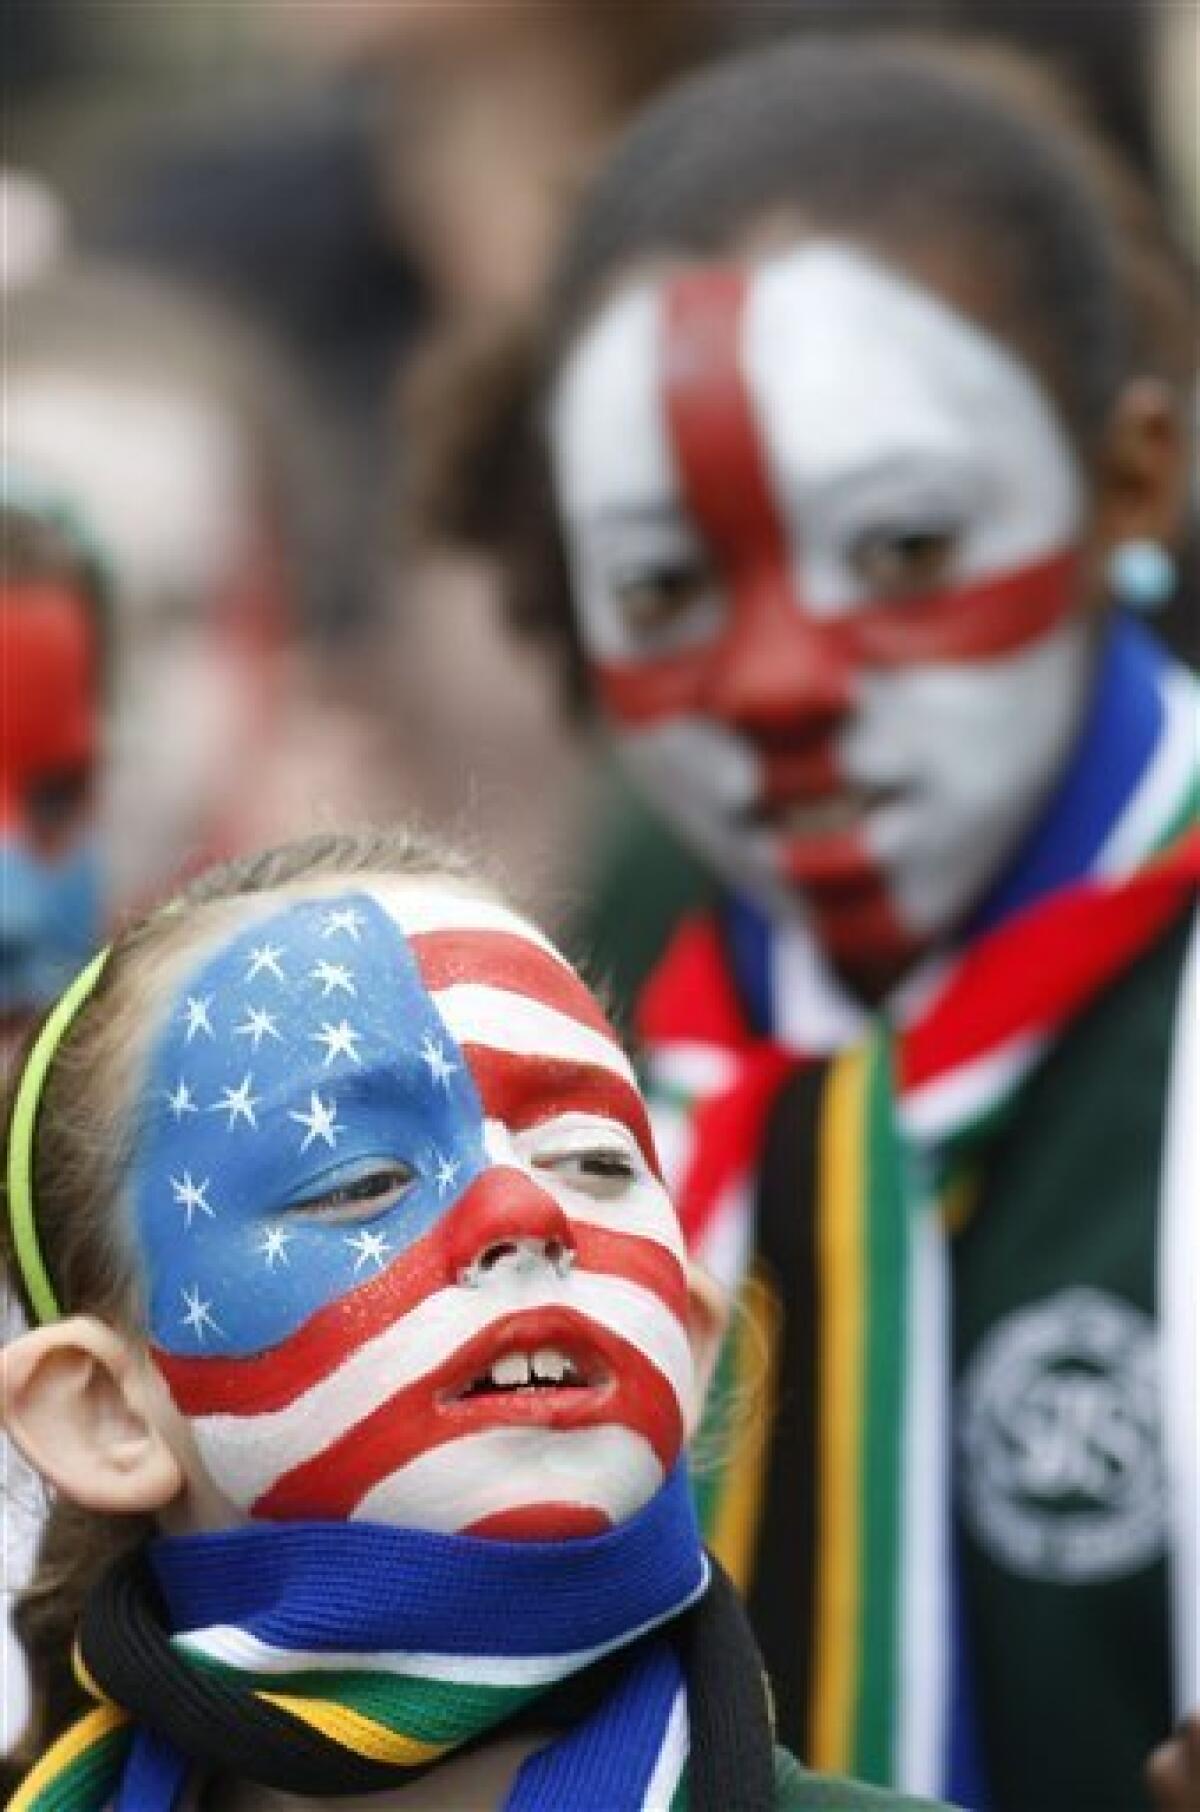 Pupils from St Joseph's Primary School with their faces painted with the country flags, of U.S., left, and England, wait for a special event to mark the start of South Africa World Cup Soccer at Trafalgar Square in London and to show support for England's bid to host the 2018 FIFA World Cup, Friday, June 11, 2010. (AP Photo/Sang Tan)